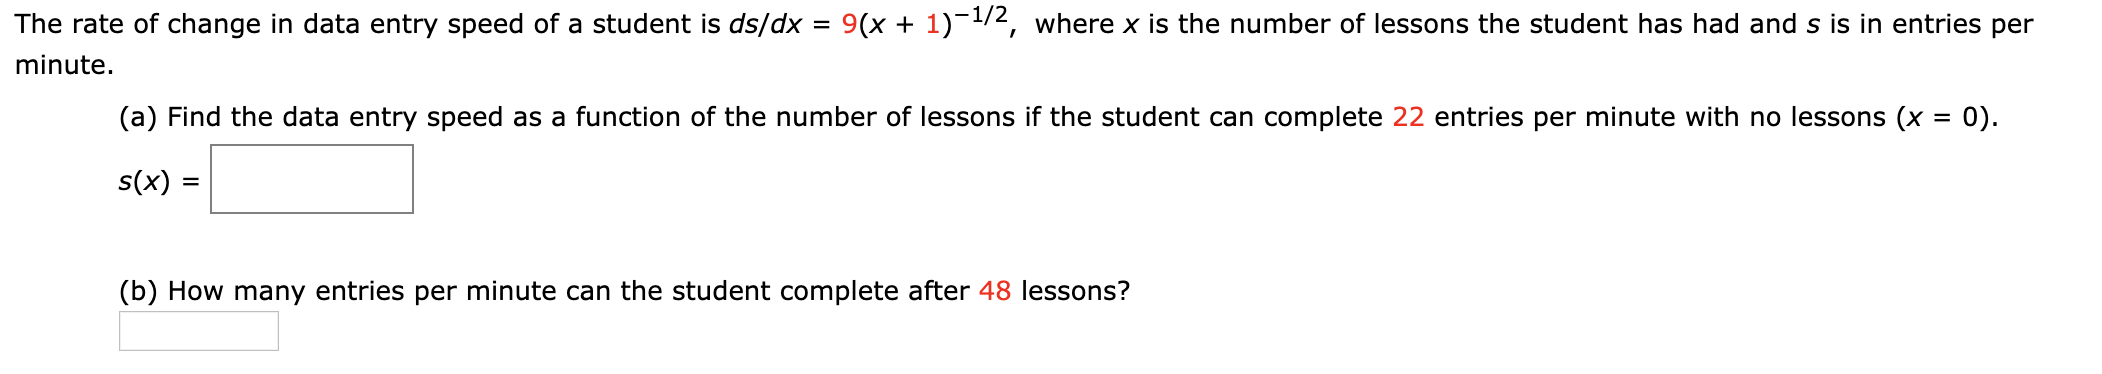 The rate of change in data entry speed of a student is ds/dx = 9(x + 1)-1/2, where x is the number of lessons the student has had and s is in entries per
minute.
(a) Find the data entry speed as a function of the number of lessons if the student can complete 22 entries per minute with no lessons (x = 0).
s(x) :
(b) How many entries per minute can the student complete after 48 lessons?
